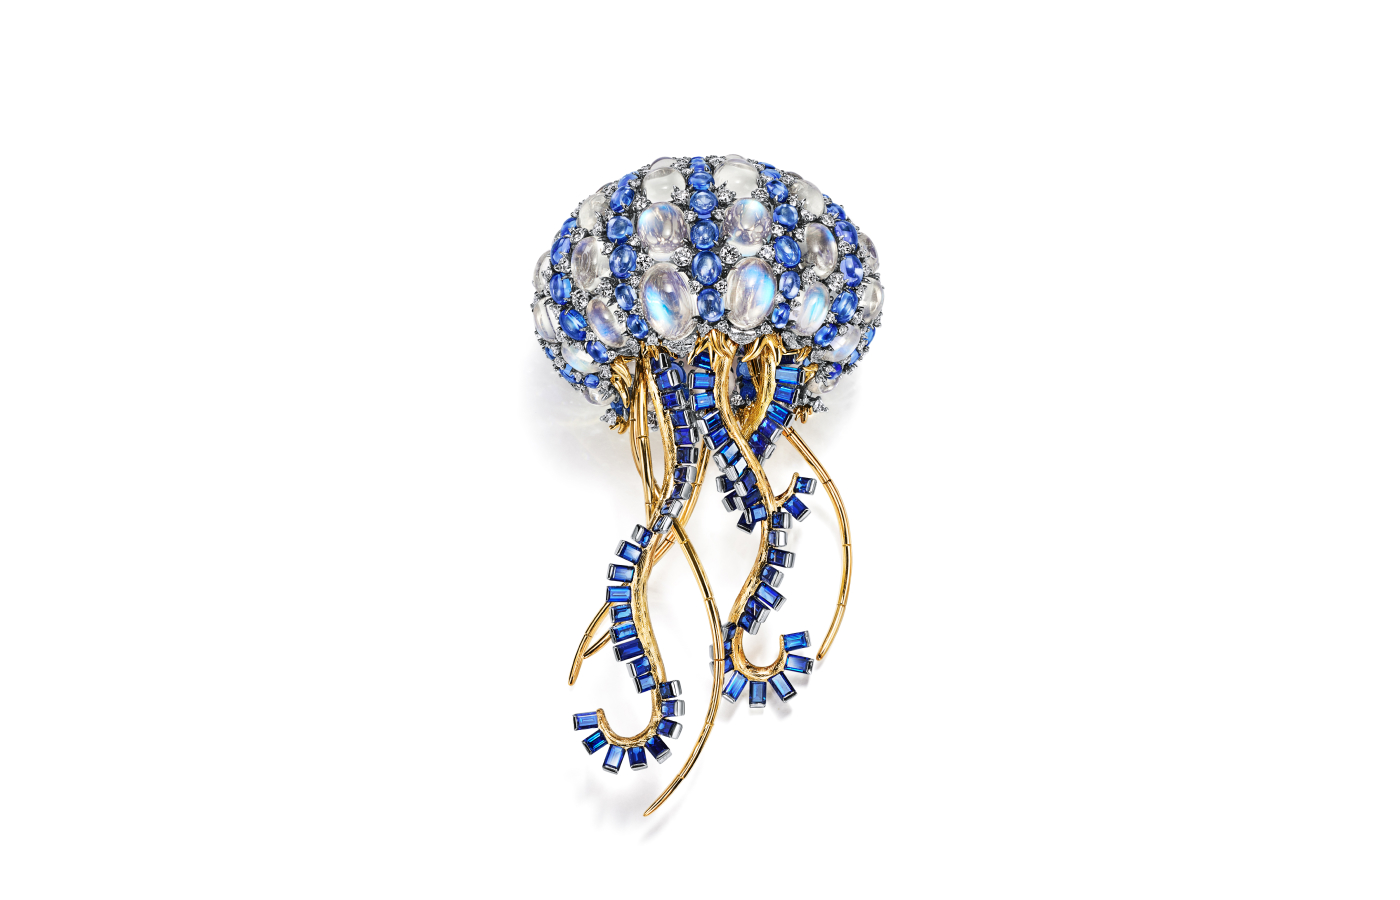 Tiffany & Co. Jellyfish brooch in gold, tanzanite, moonstone and diamonds from the Blue Book 2023: Into the Blue high jewellery collection